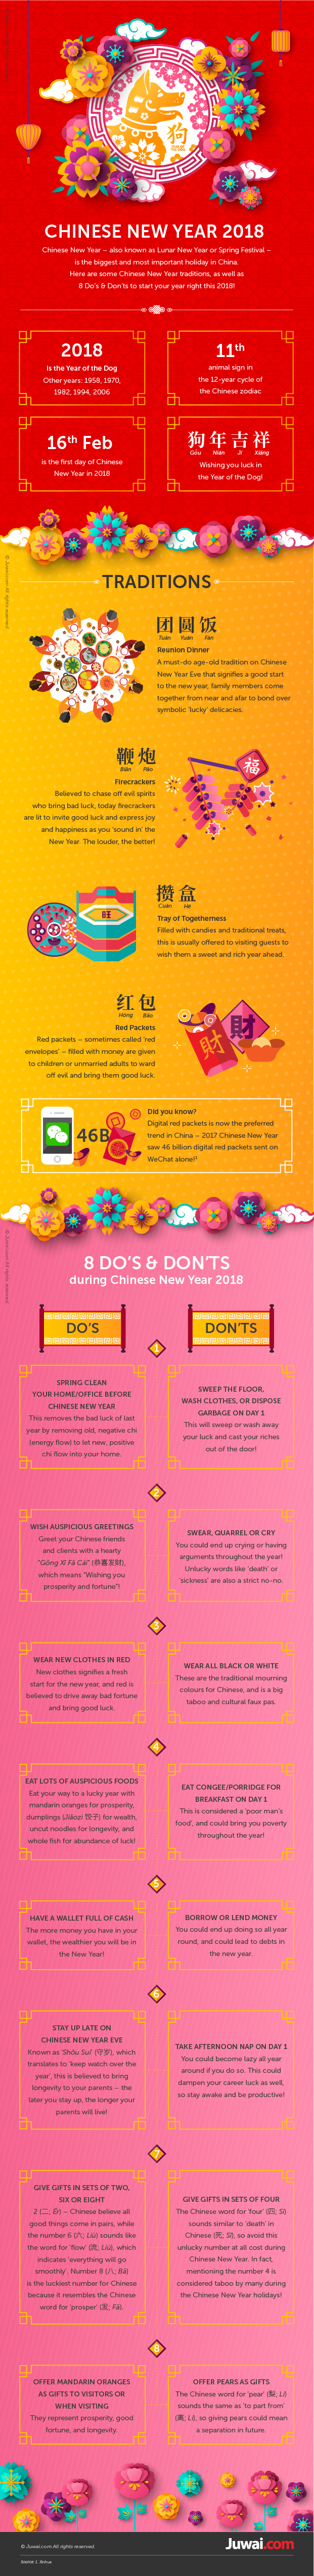 8 Do's & Don'ts during Chinese New Year 2018